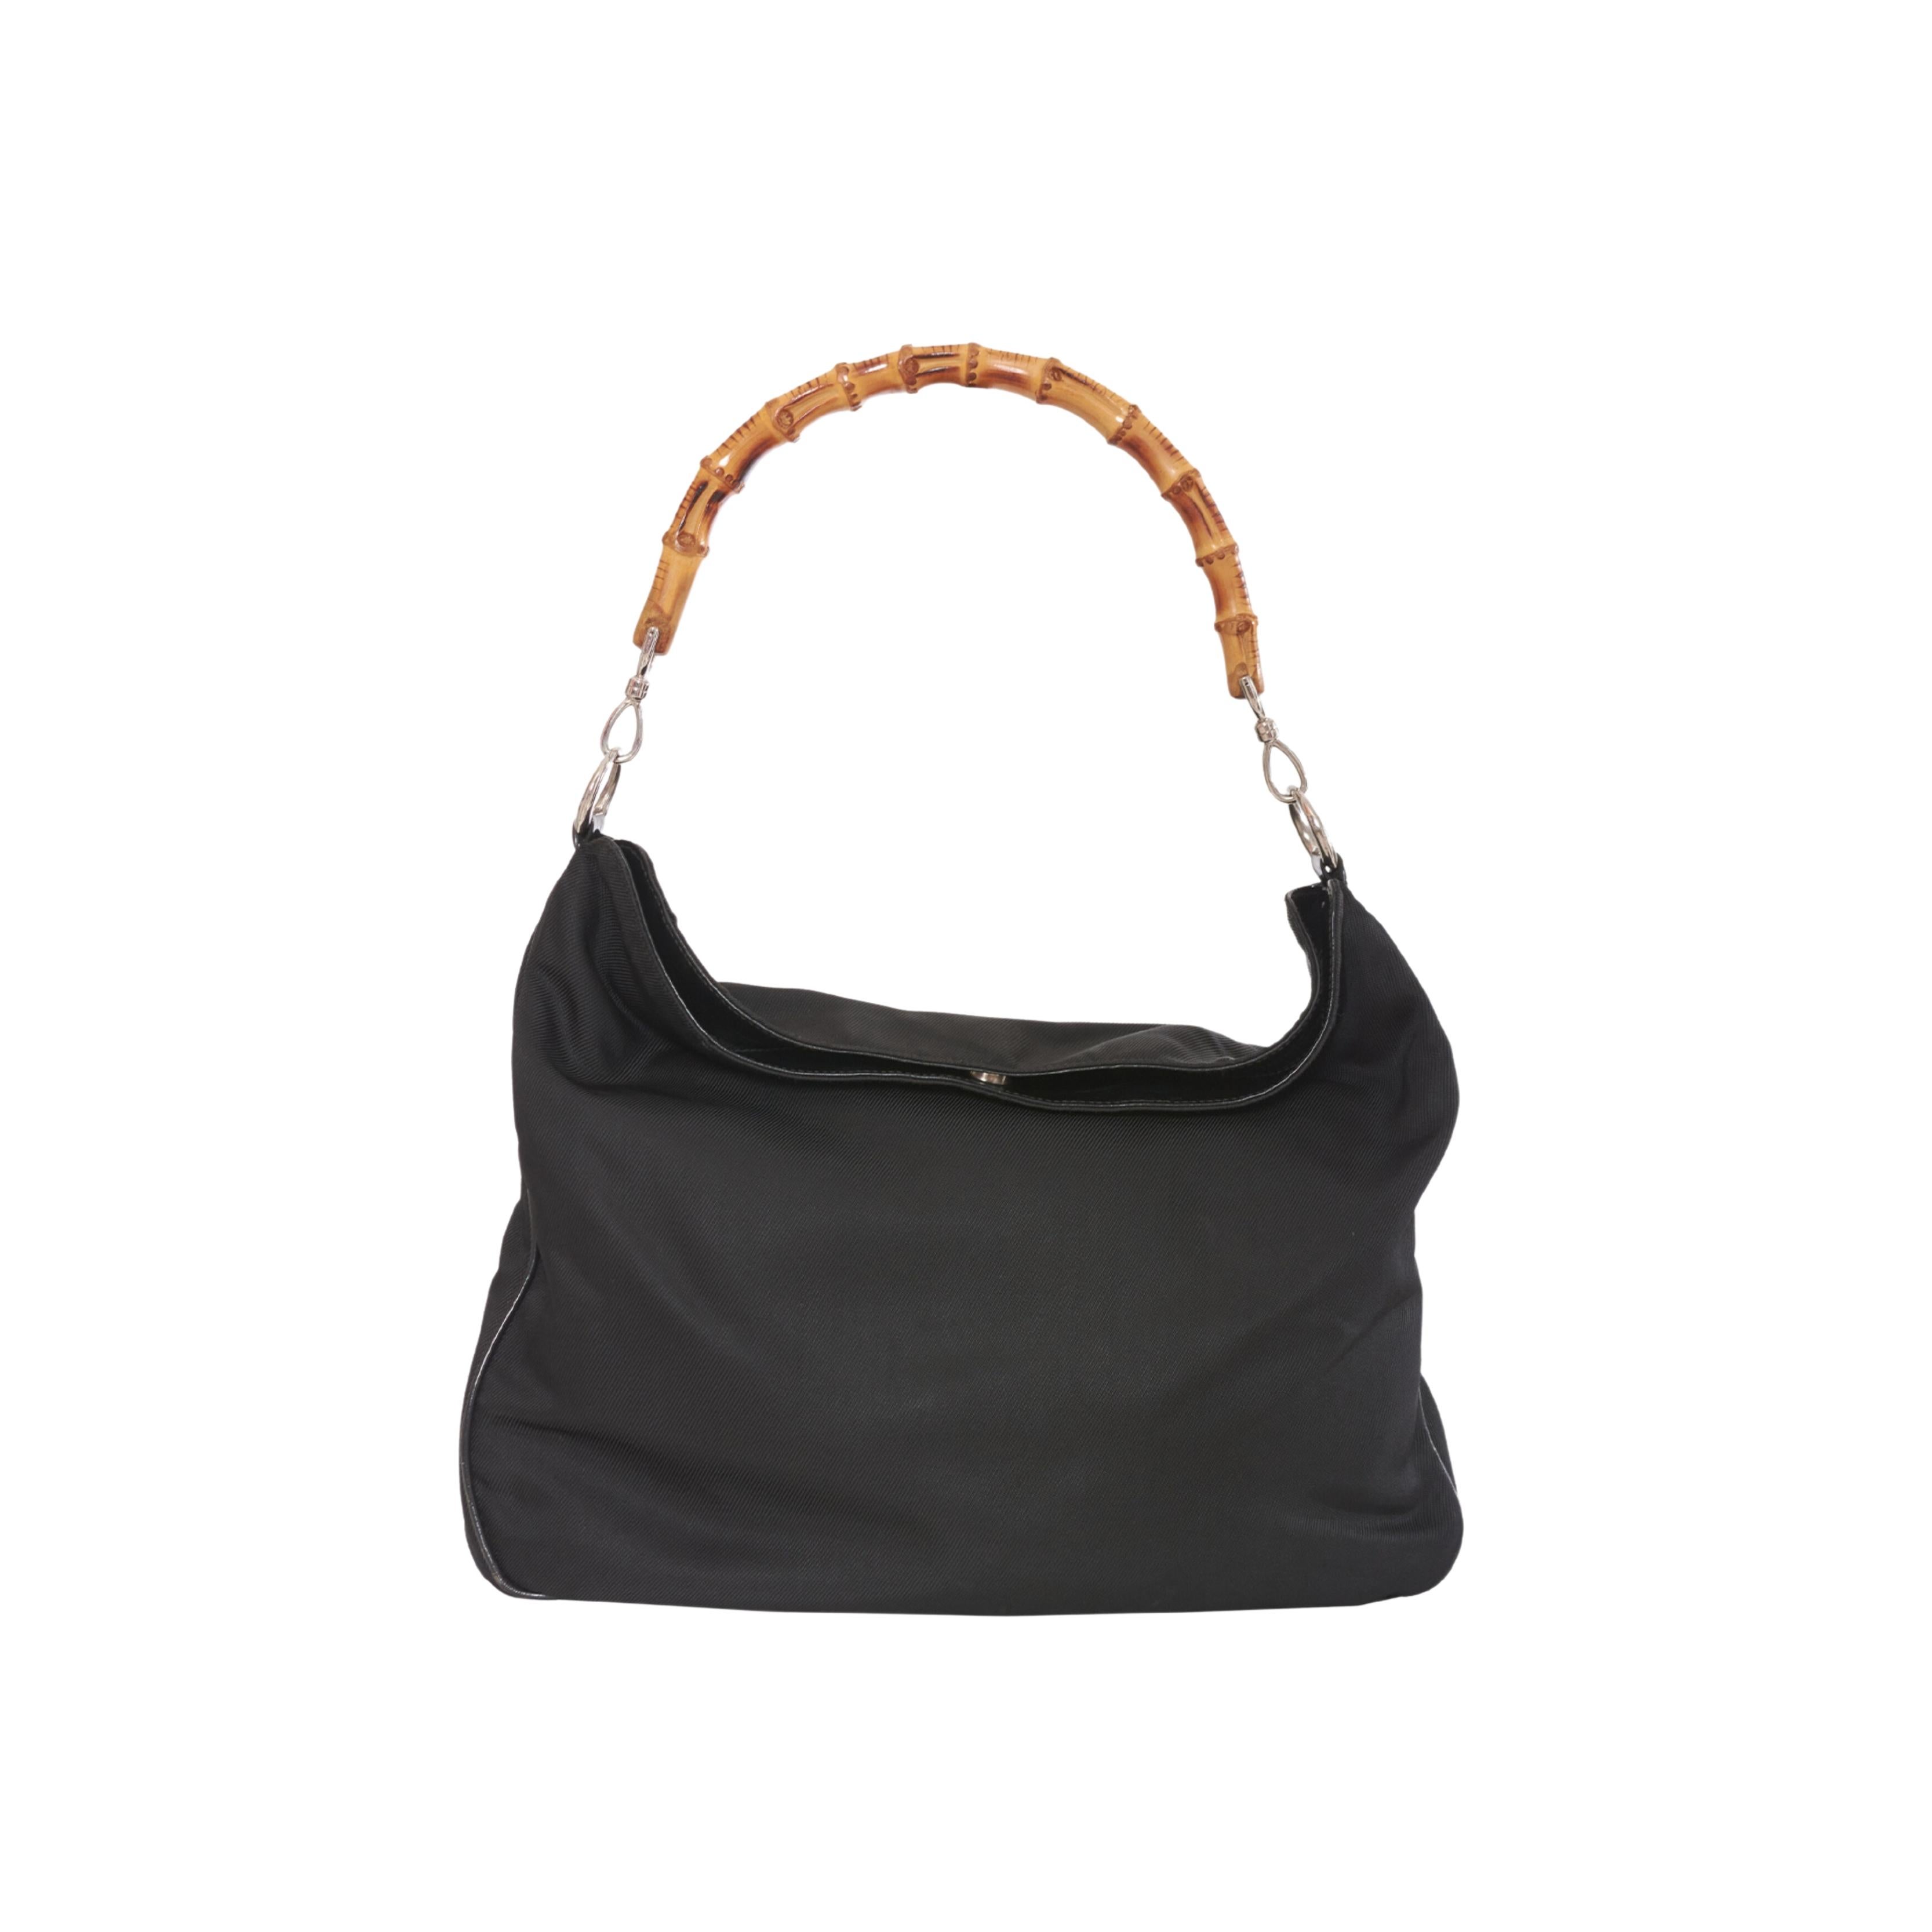 Made of high-quality canvas with glossy black leather trim, the iconic bamboo bag by Gucci features a beautiful hand-woven bamboo handle that lends an exotic and natural touch to its aesthetic. 
The bag's snap-button closure is easy to use. Inside